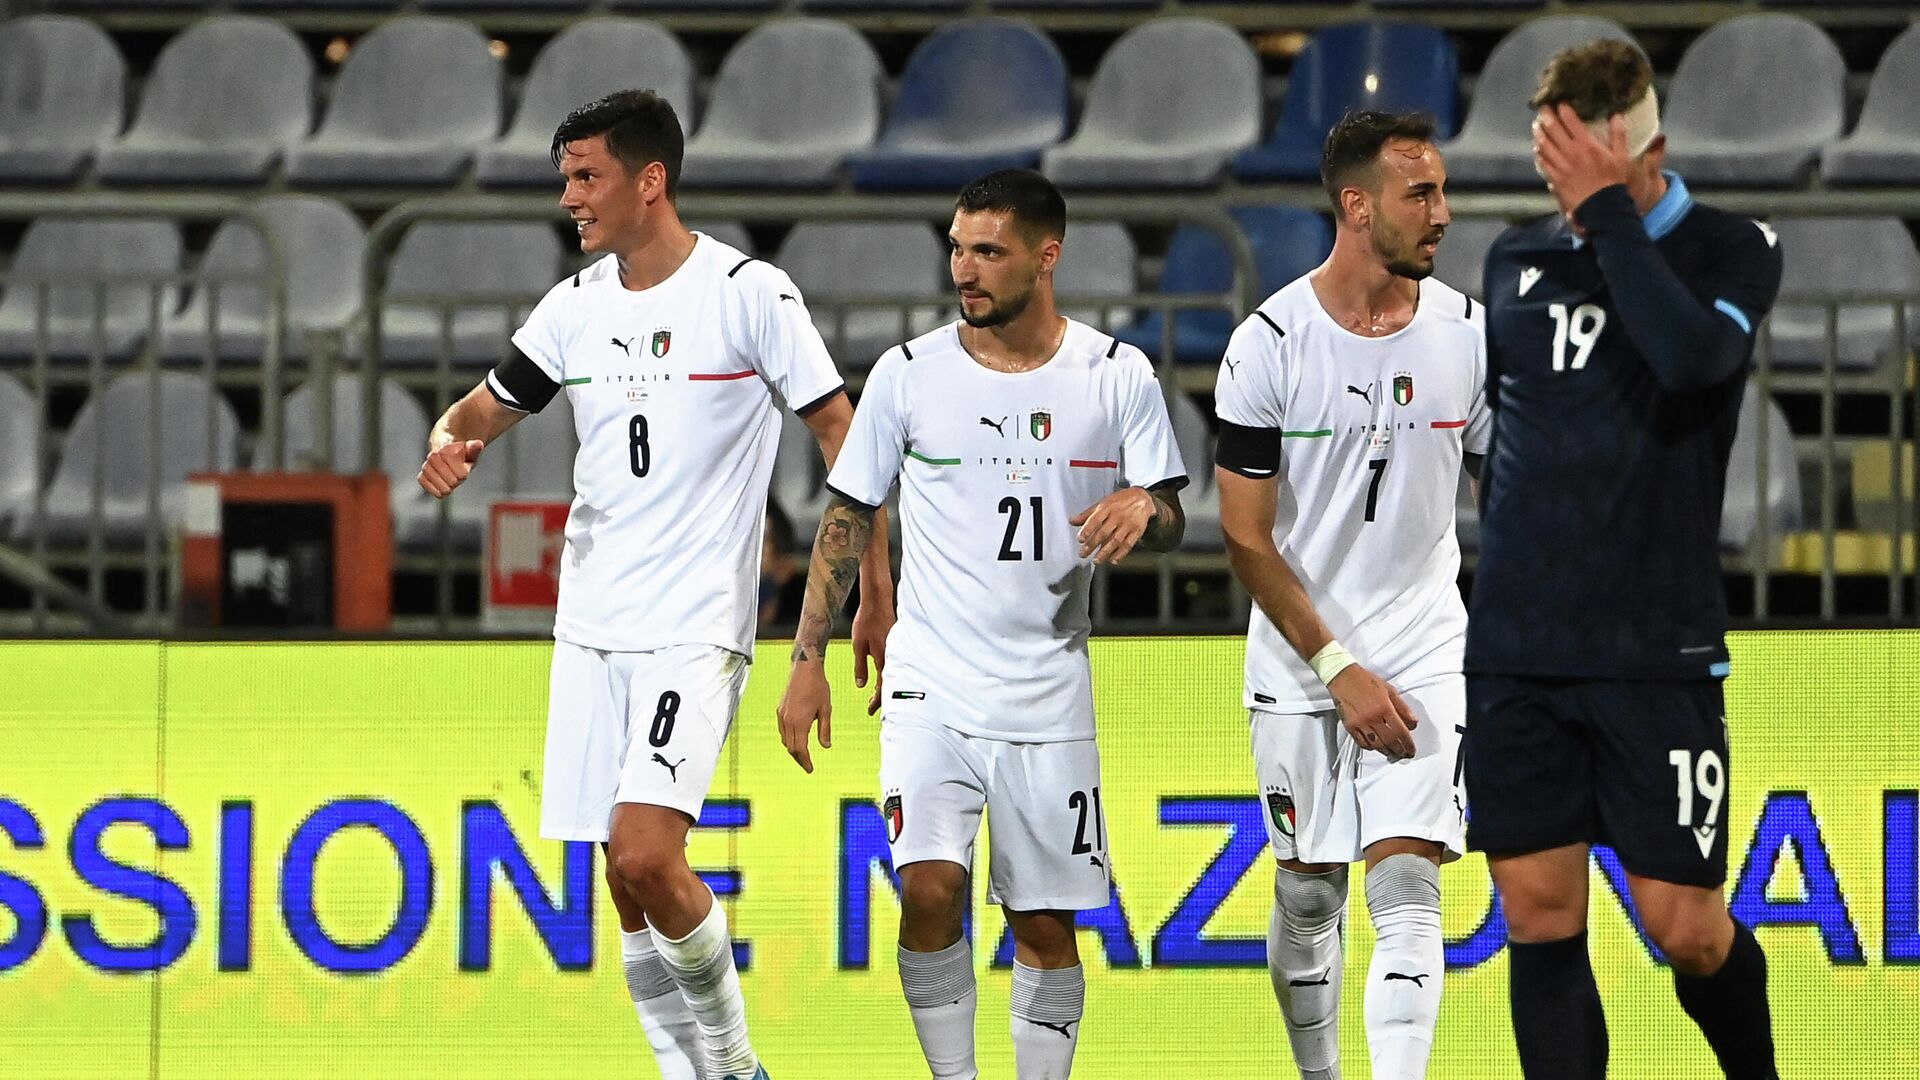 Italy's midfielder Matteo Pessina (L) celebrates with teammates after scoring a goal during a friendly football match between Italy and San Marino at the Sardegna Arena in Cagliari on May 28, 2021, in preparation for the UEFA Euro 2020 European Football Championship. (Photo by ANDREAS SOLARO / AFP) - РИА Новости, 1920, 29.05.2021